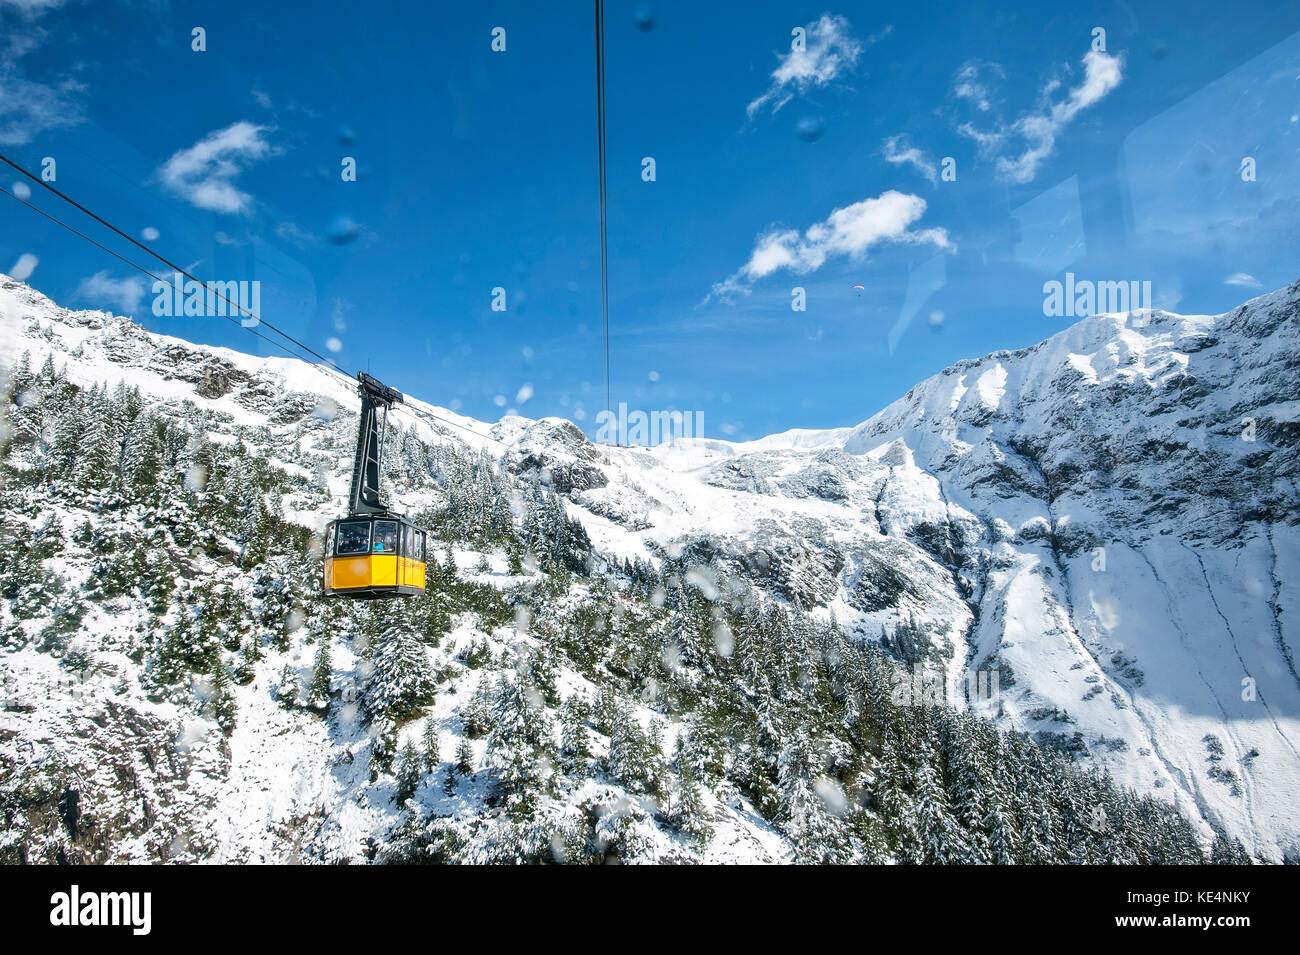 Nebelhorn cable car hi-res stock photography and images - Alamy